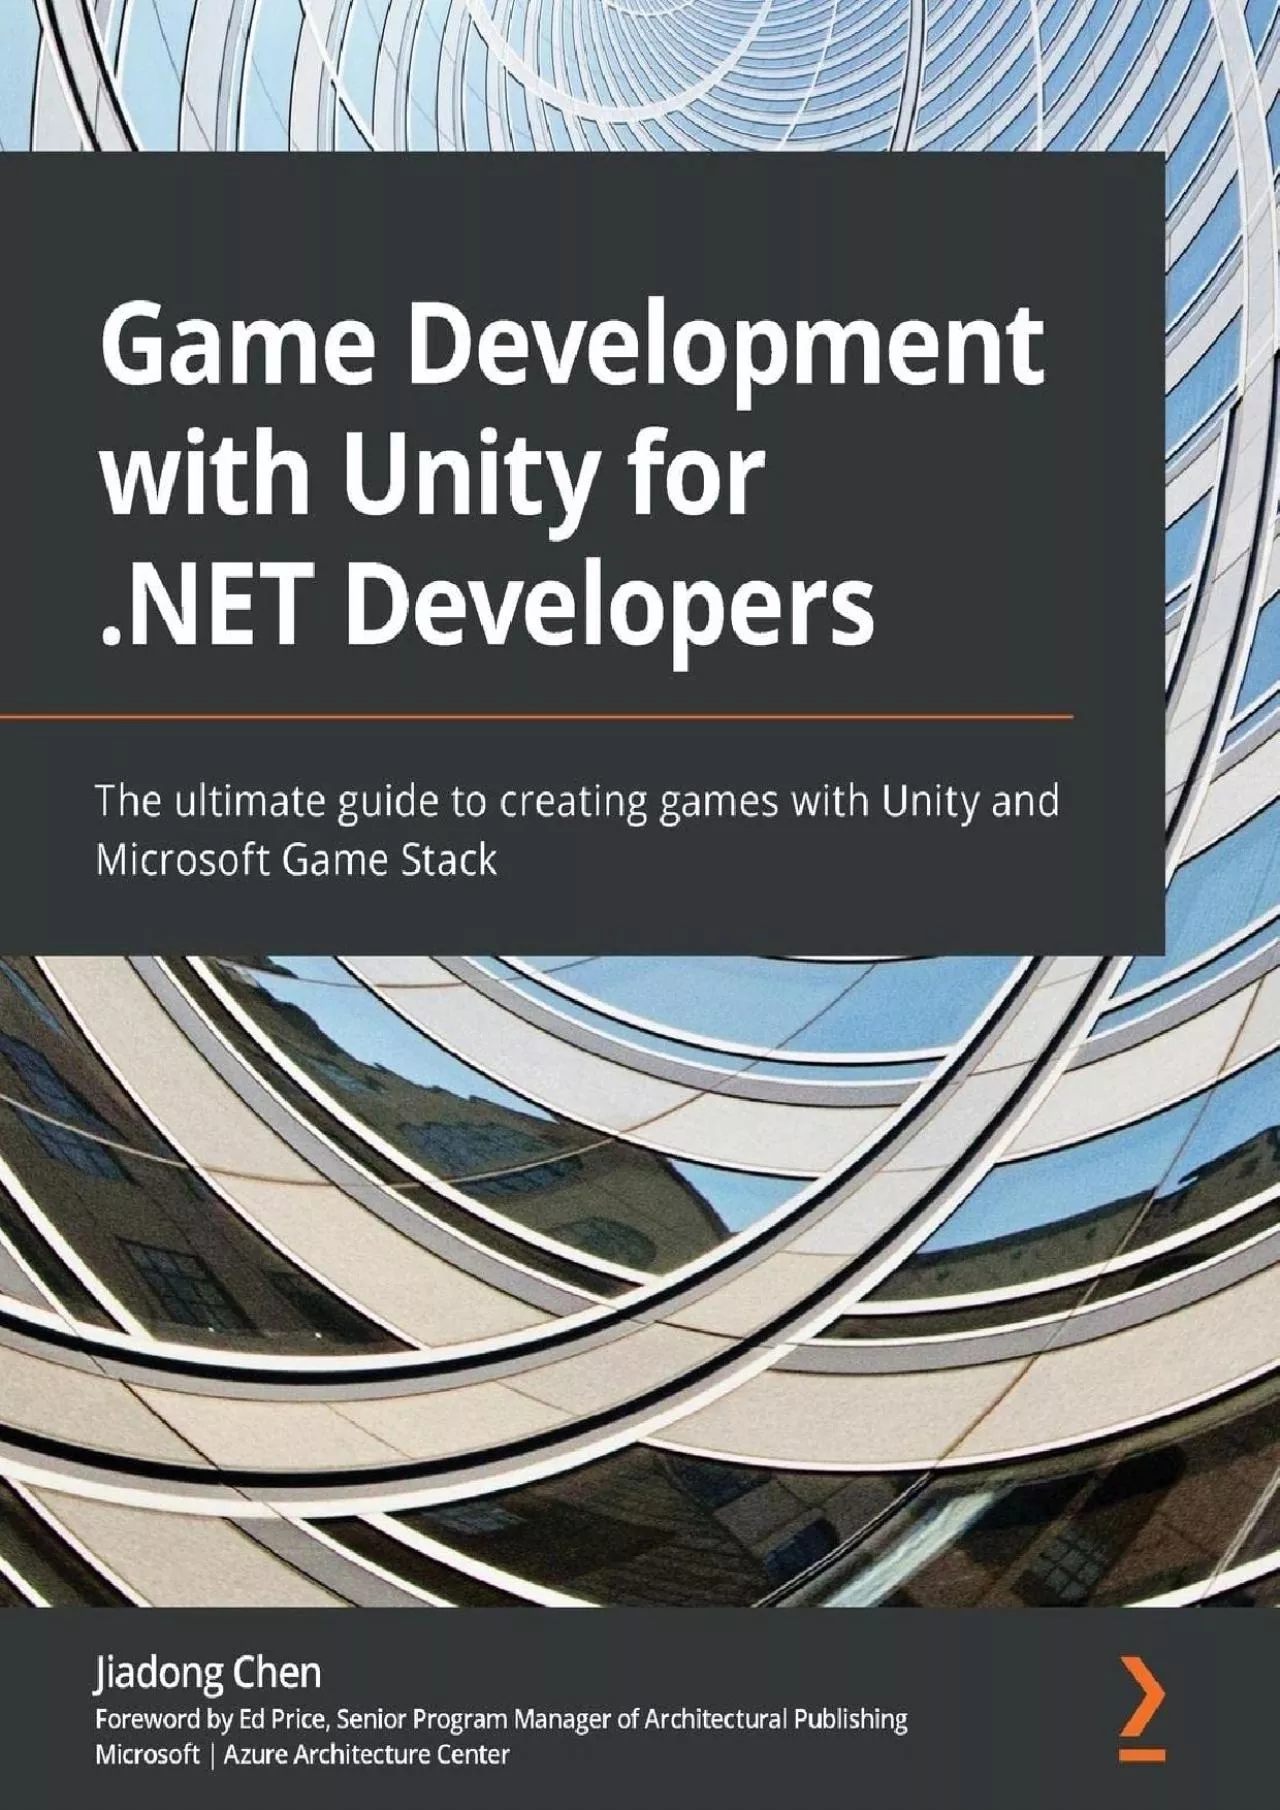 [BEST]-Game Development with Unity for .NET Developers: The ultimate guide to creating